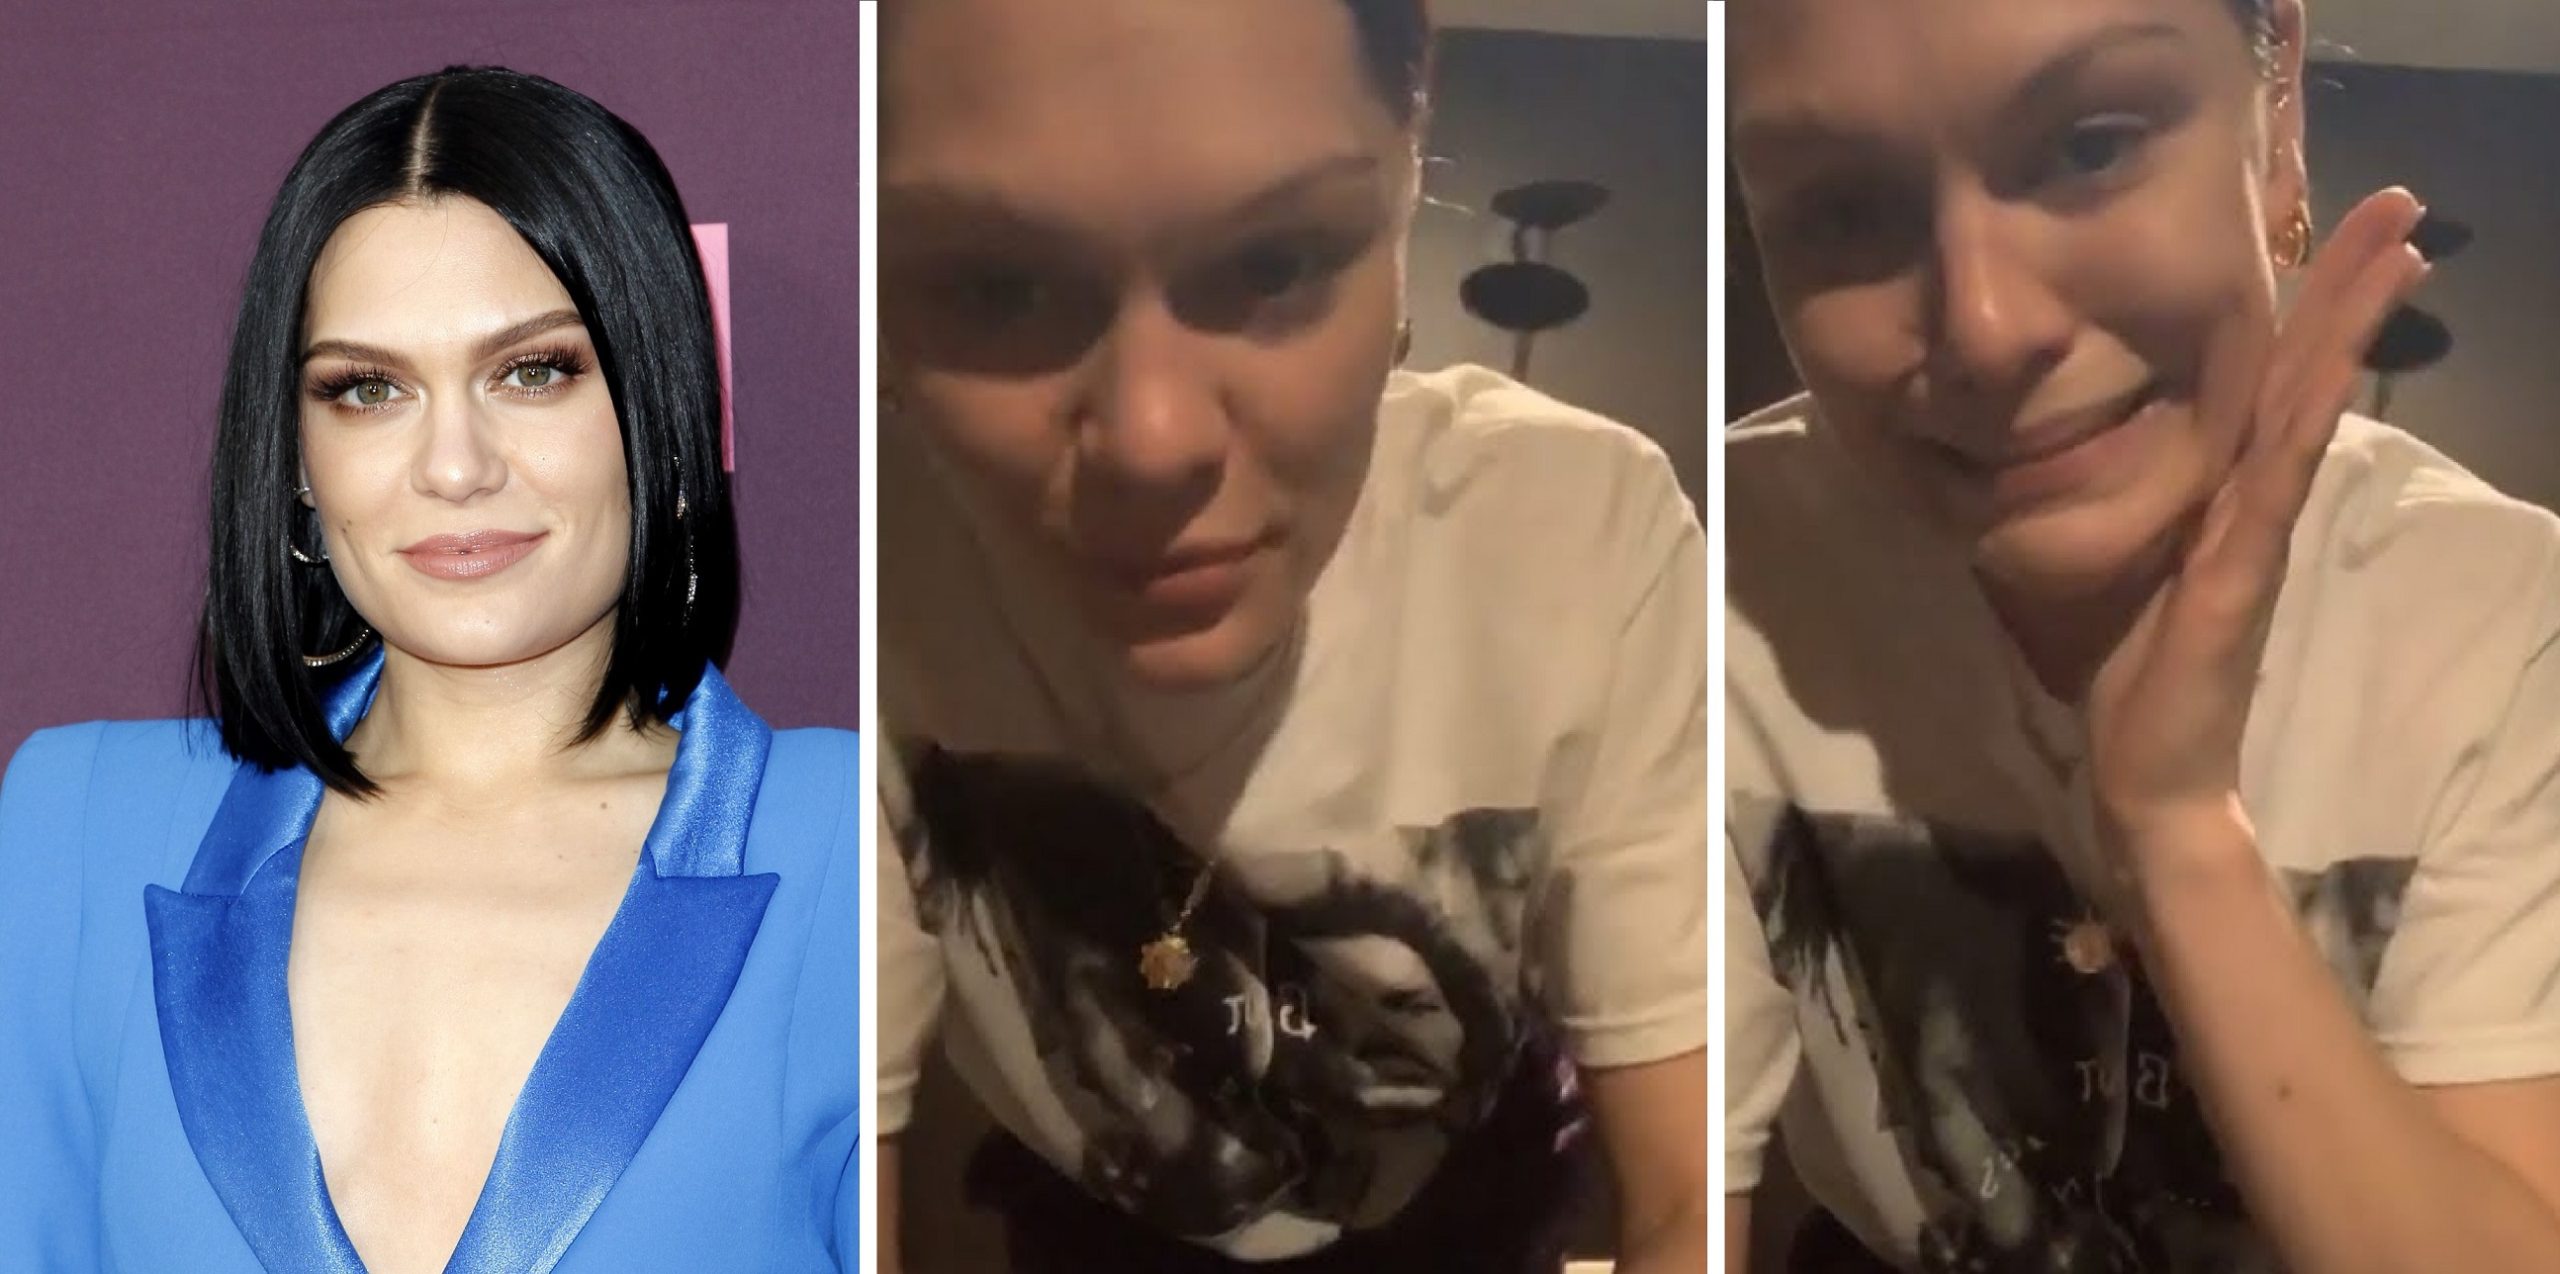 Jessie J Was Hospitalized On Christmas Eve After Waking Up Unable To Hear or Walk Straight